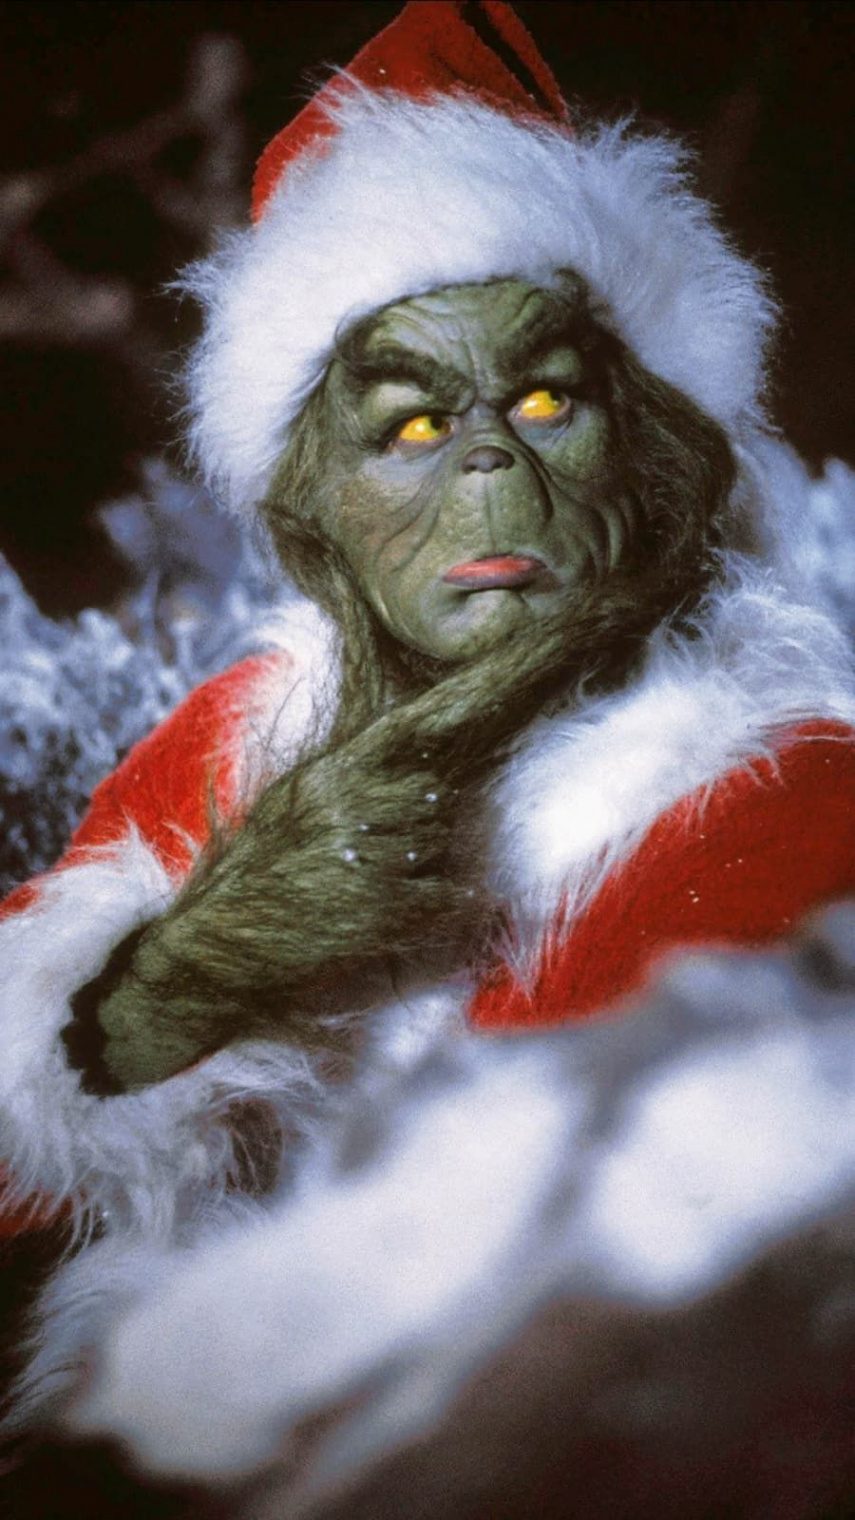 Jim Carrey as the "Grinch" in the  film How The Grinch Stole